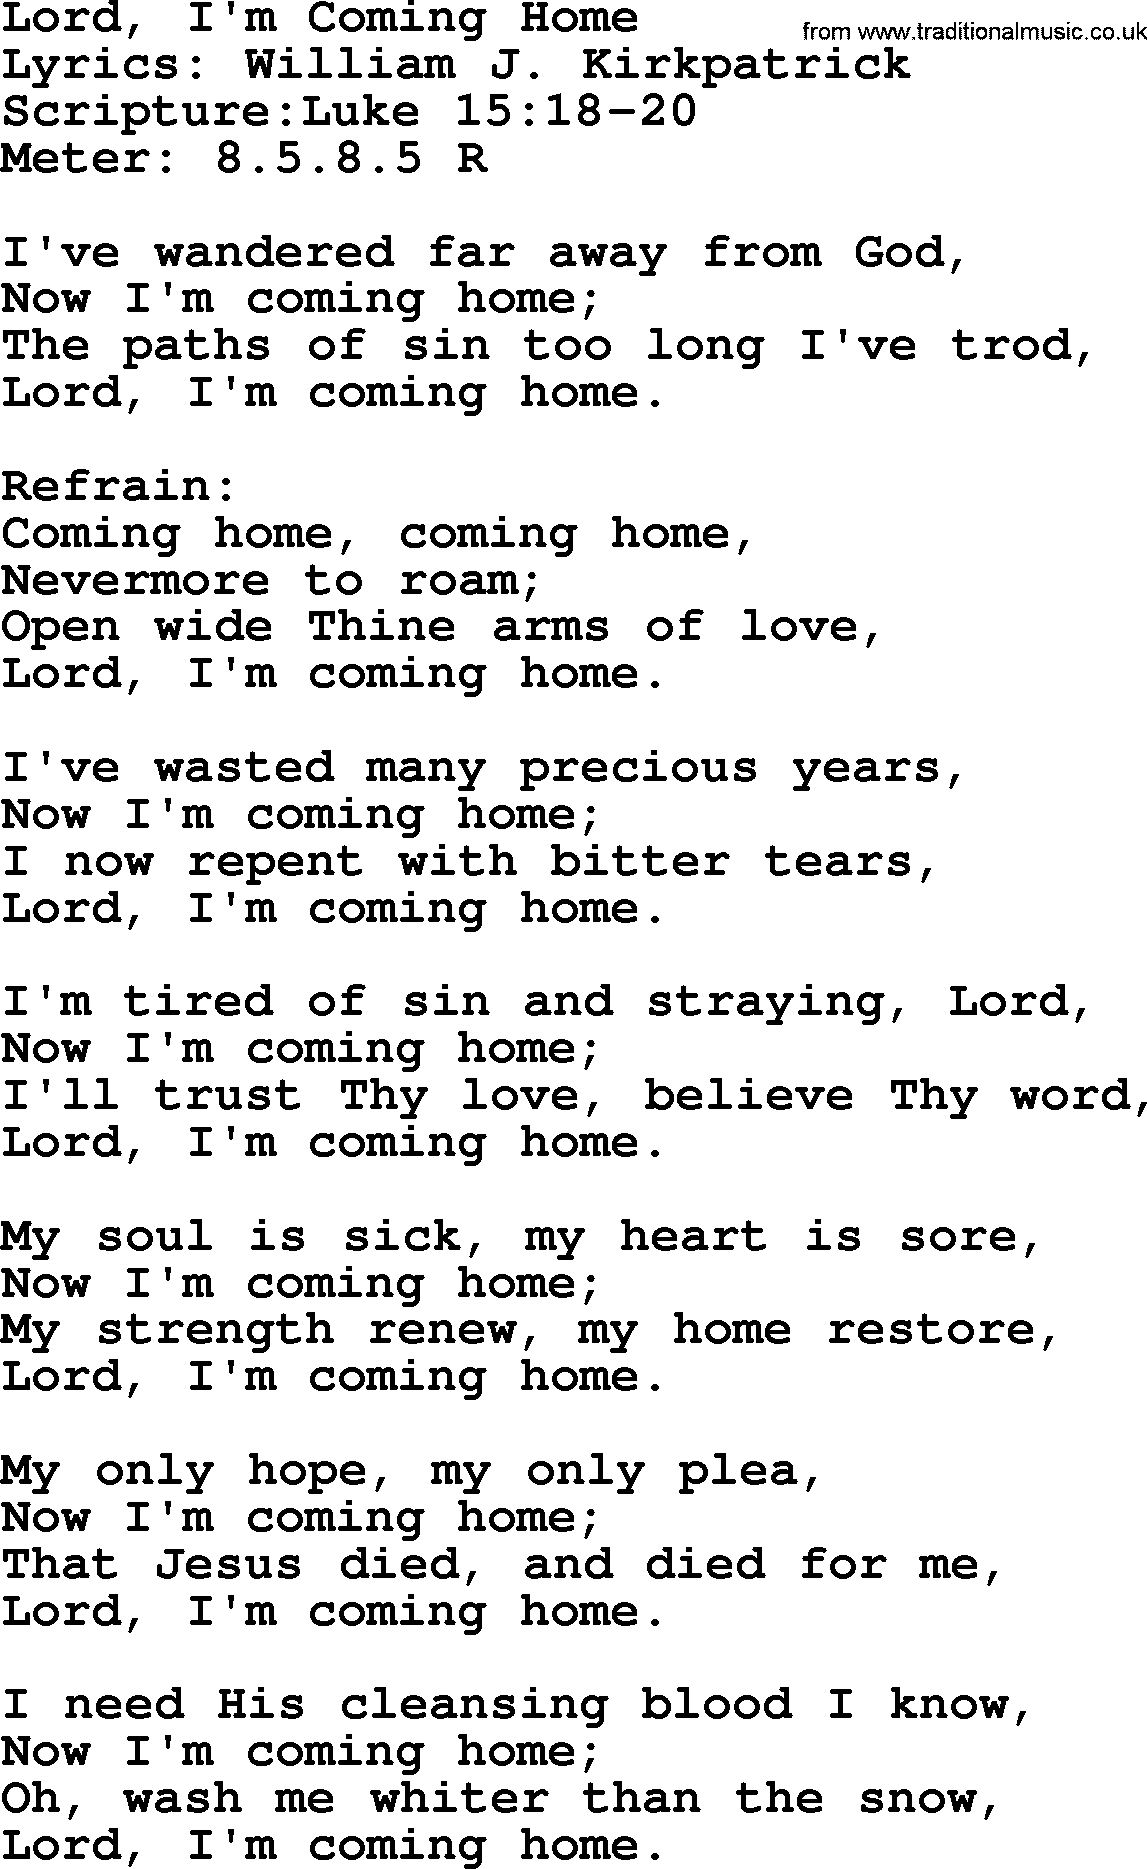 A collection of 500+ most sung Christian church hymns and songs, title: Lord, I'm Coming Home, lyrics, PPTX and PDF